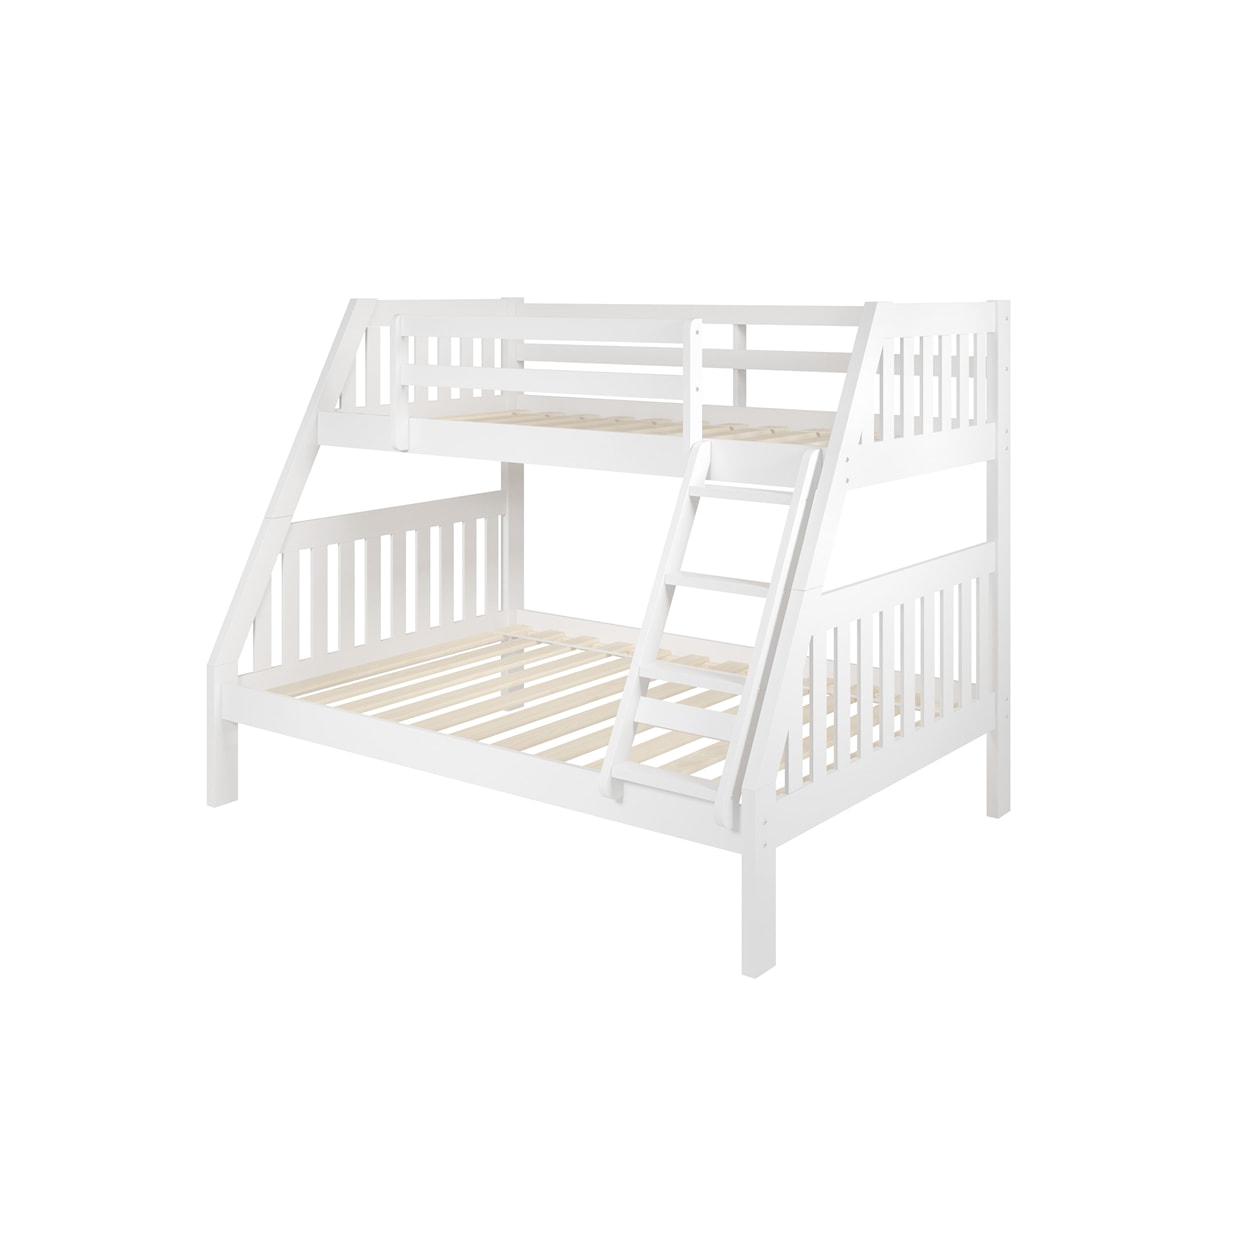 Donco Trading Co 1018 Twin/Full Bunk Bed